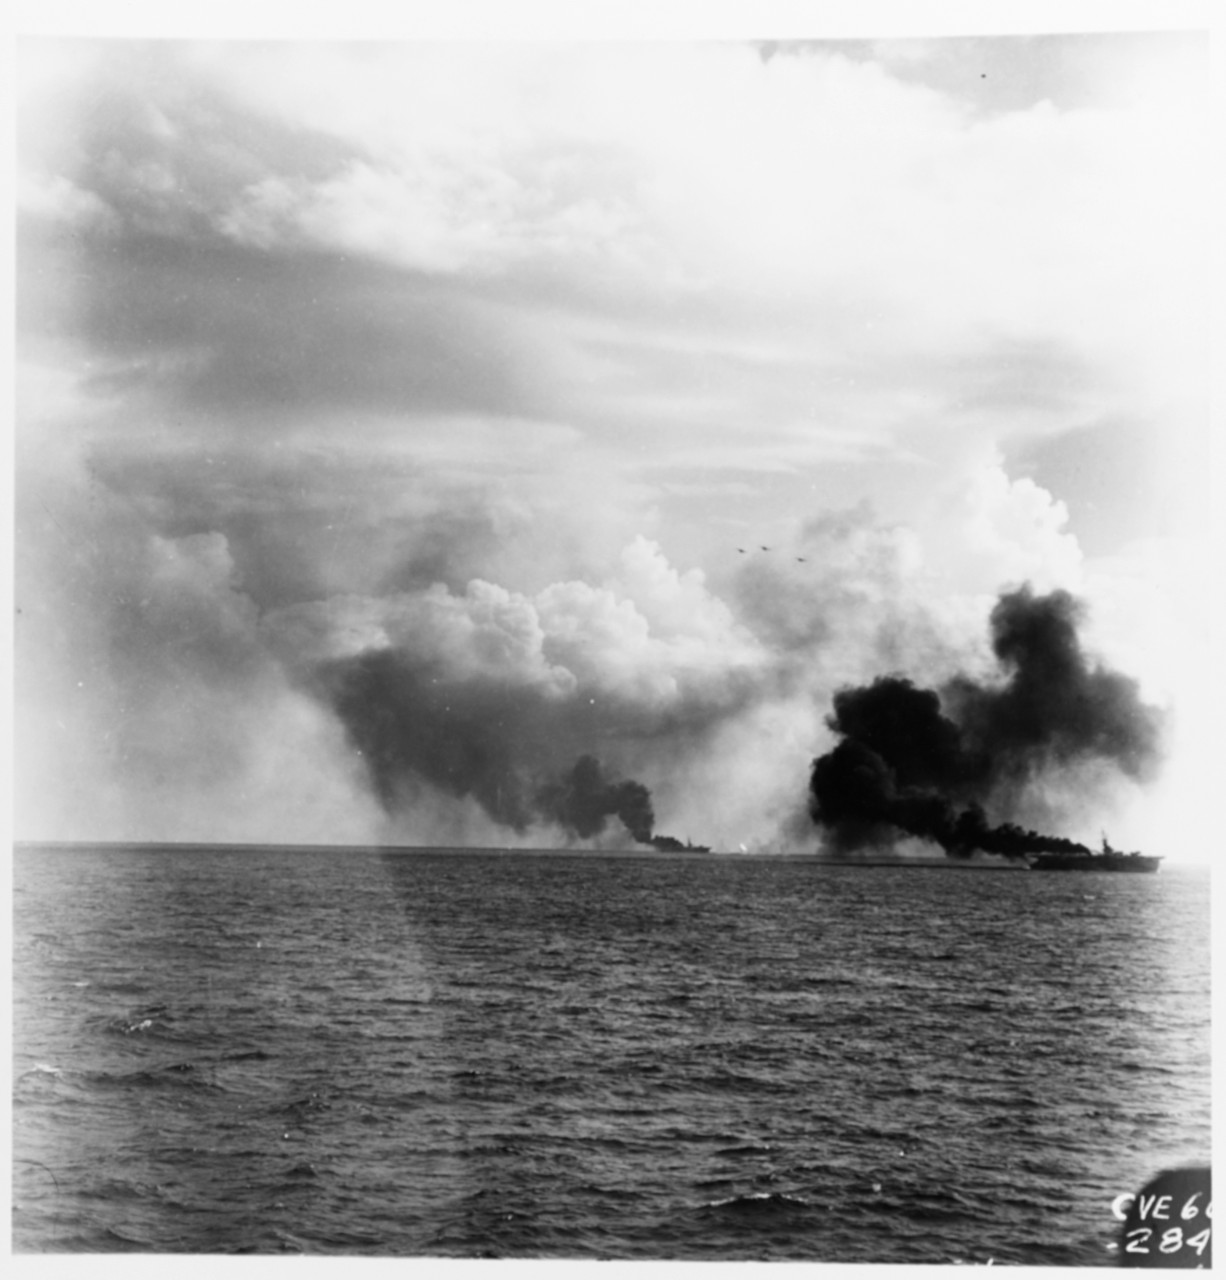 Two escort carriers of Carrier Division 25 under shell attack by the Japanese fleet. Note U.S. Navy planes overhead. Photo by USS White Plains (CVE-66).